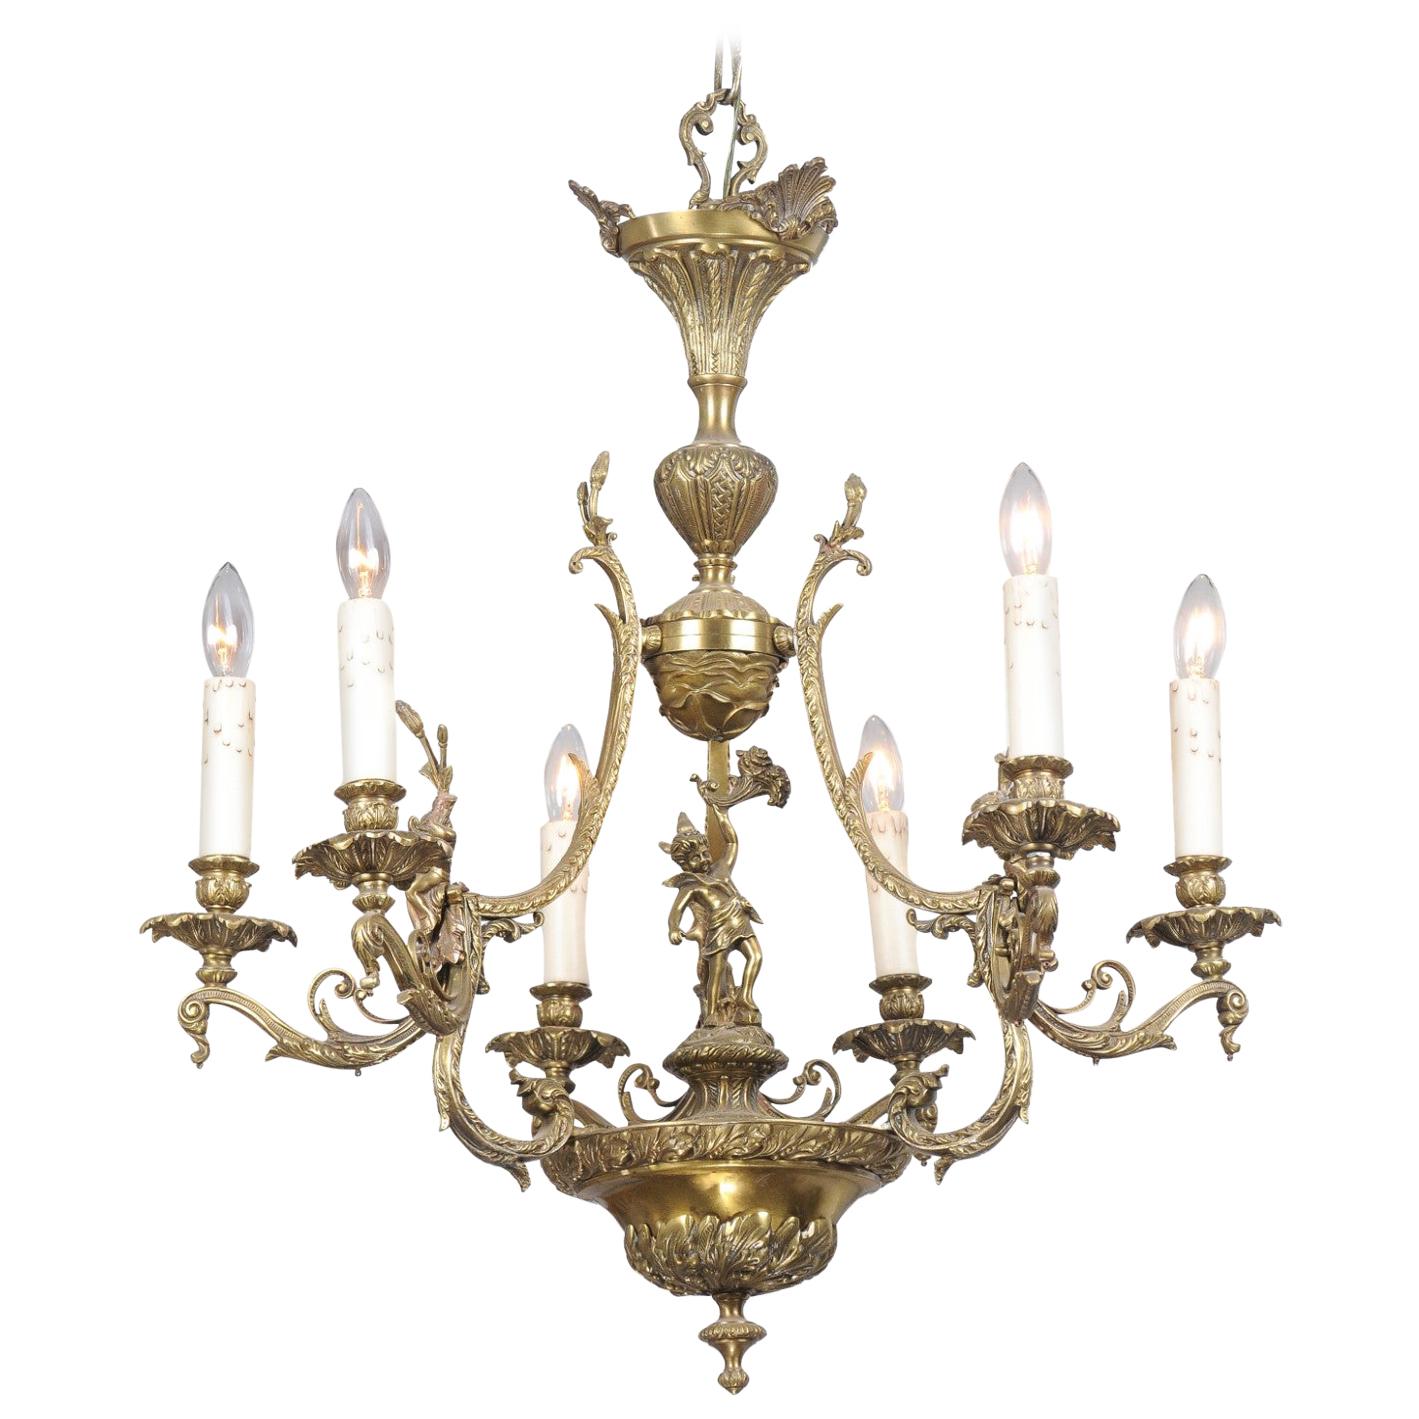 Spanish 19th Century Bronze Six-Light Chandelier with Cherubs and Floral Decor For Sale